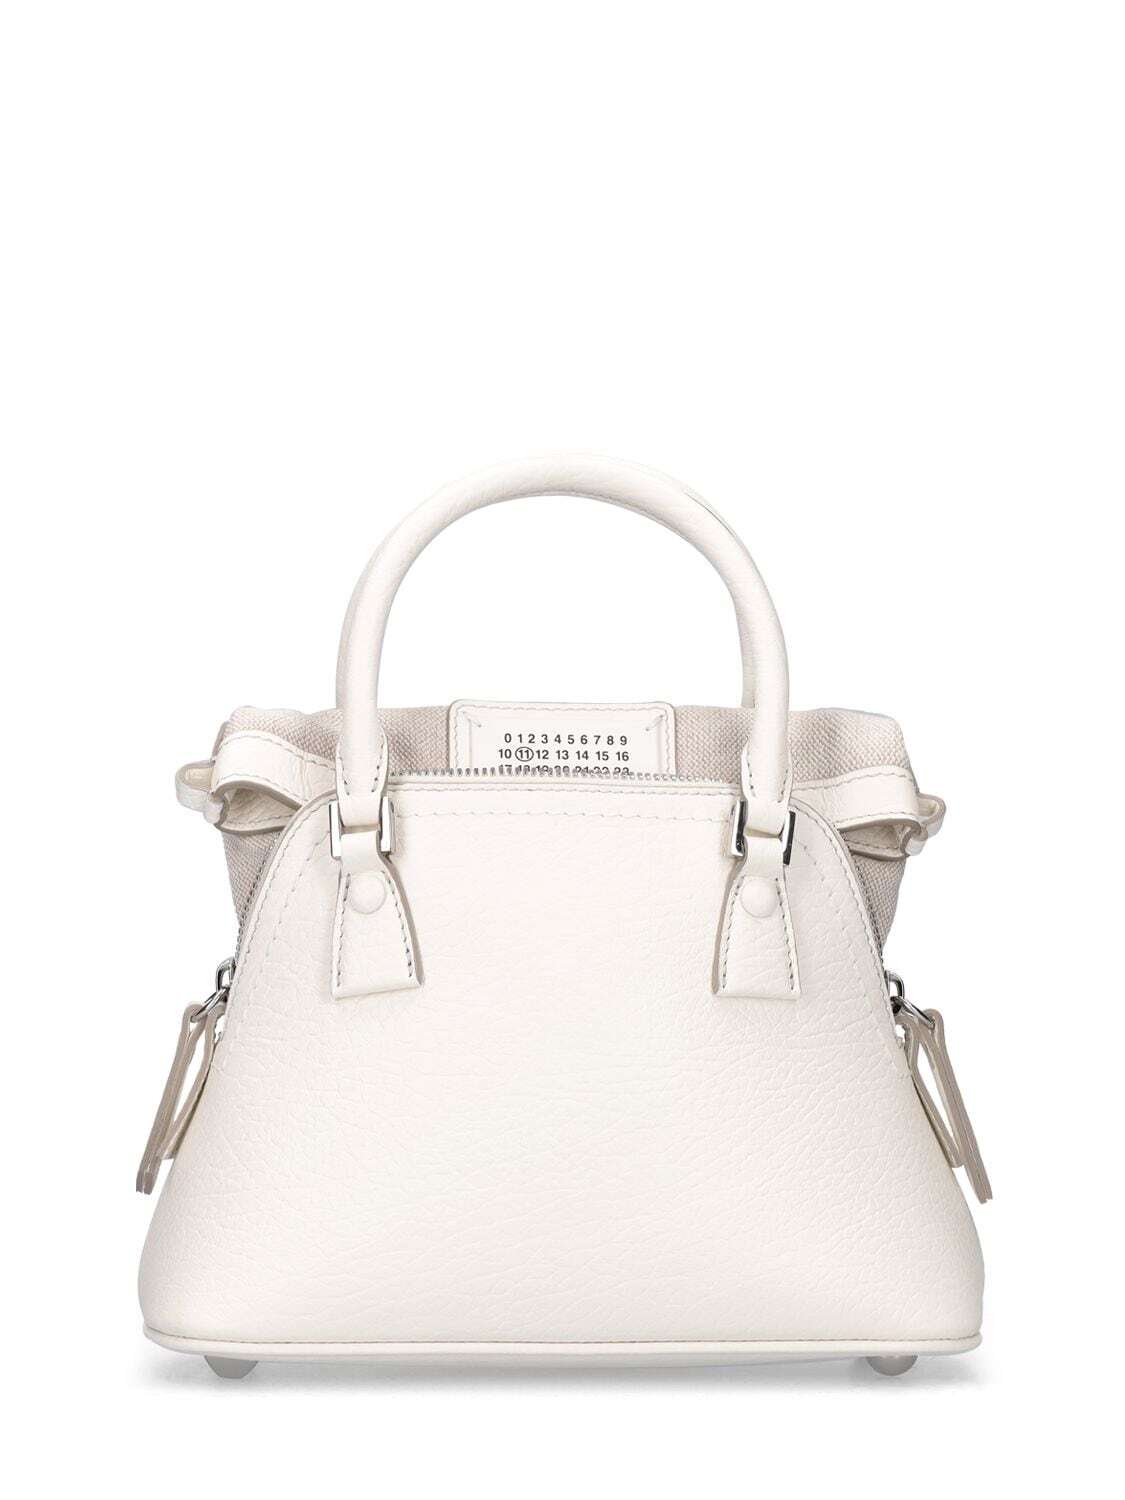 MAISON MARGIELA 5ac Micro Grained Leather Top Handle Bag in white